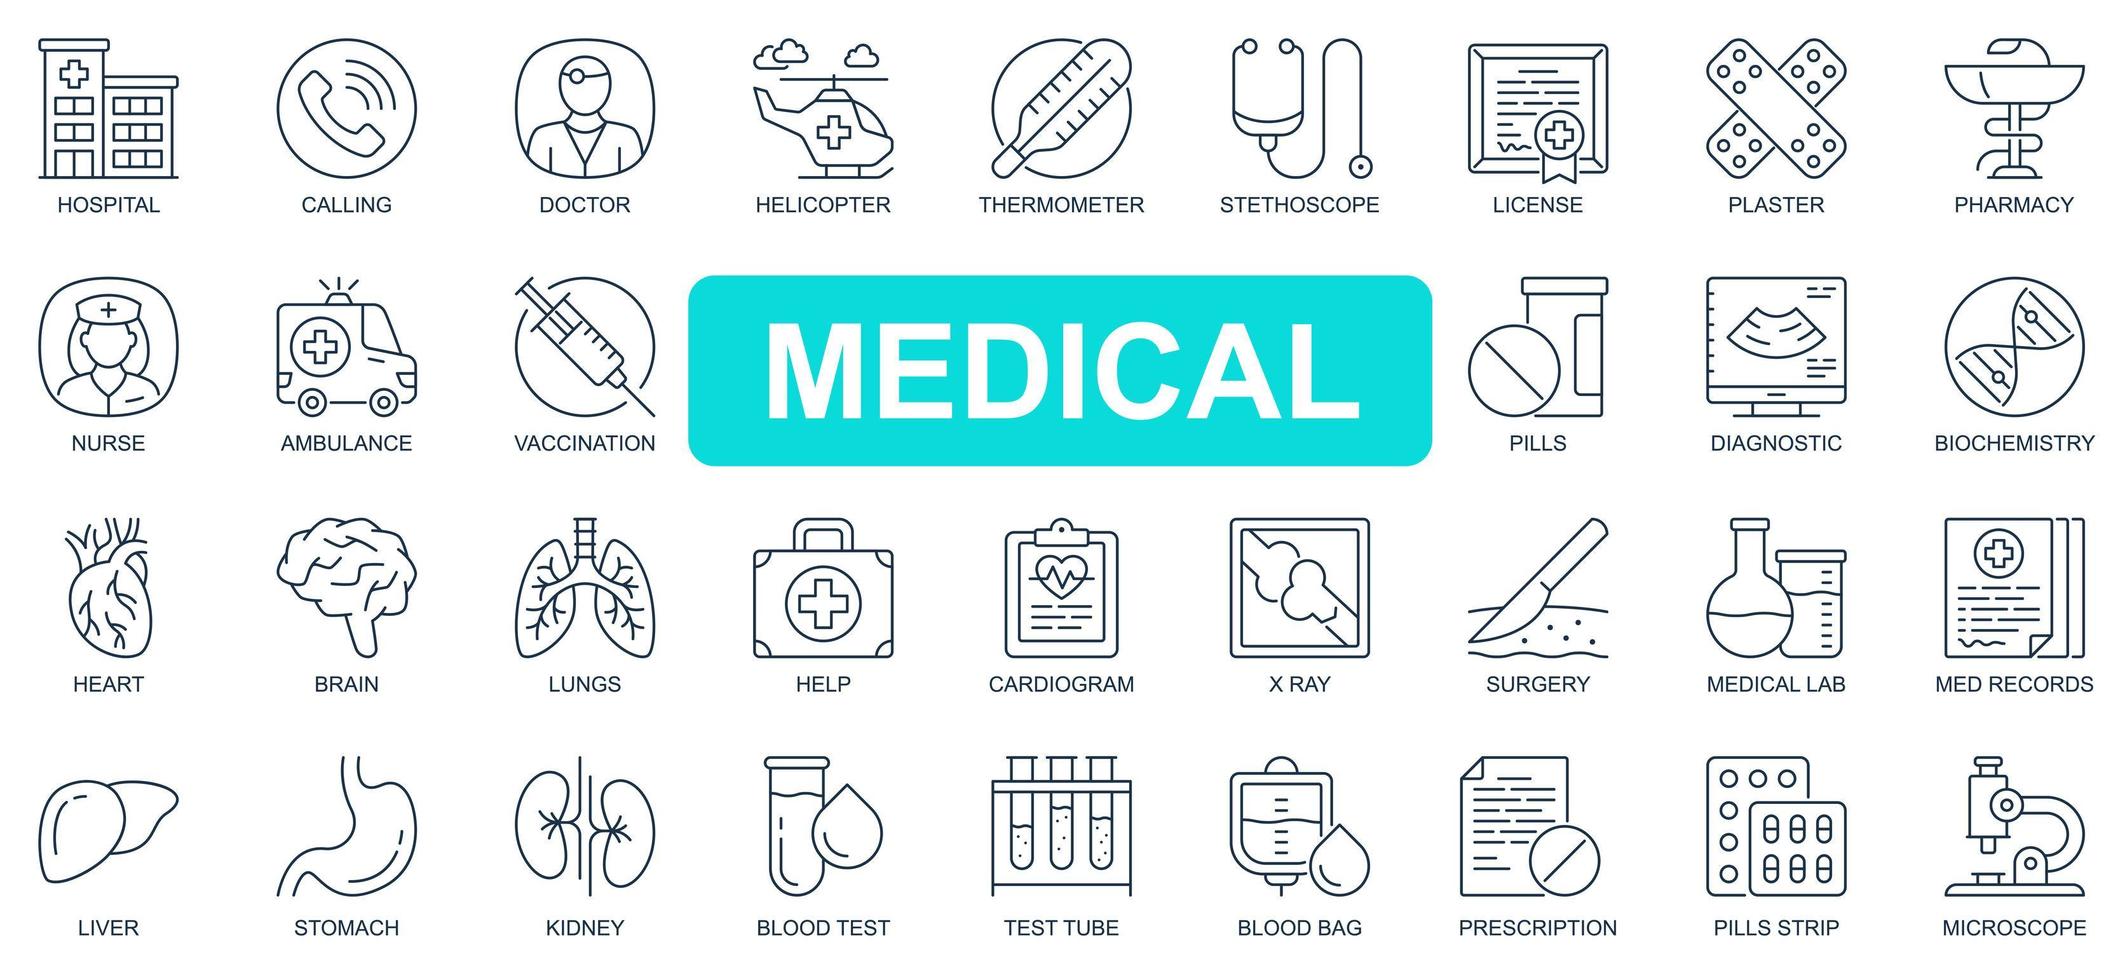 Packing A Hospital Bag Vector Illustrated Infographic With A